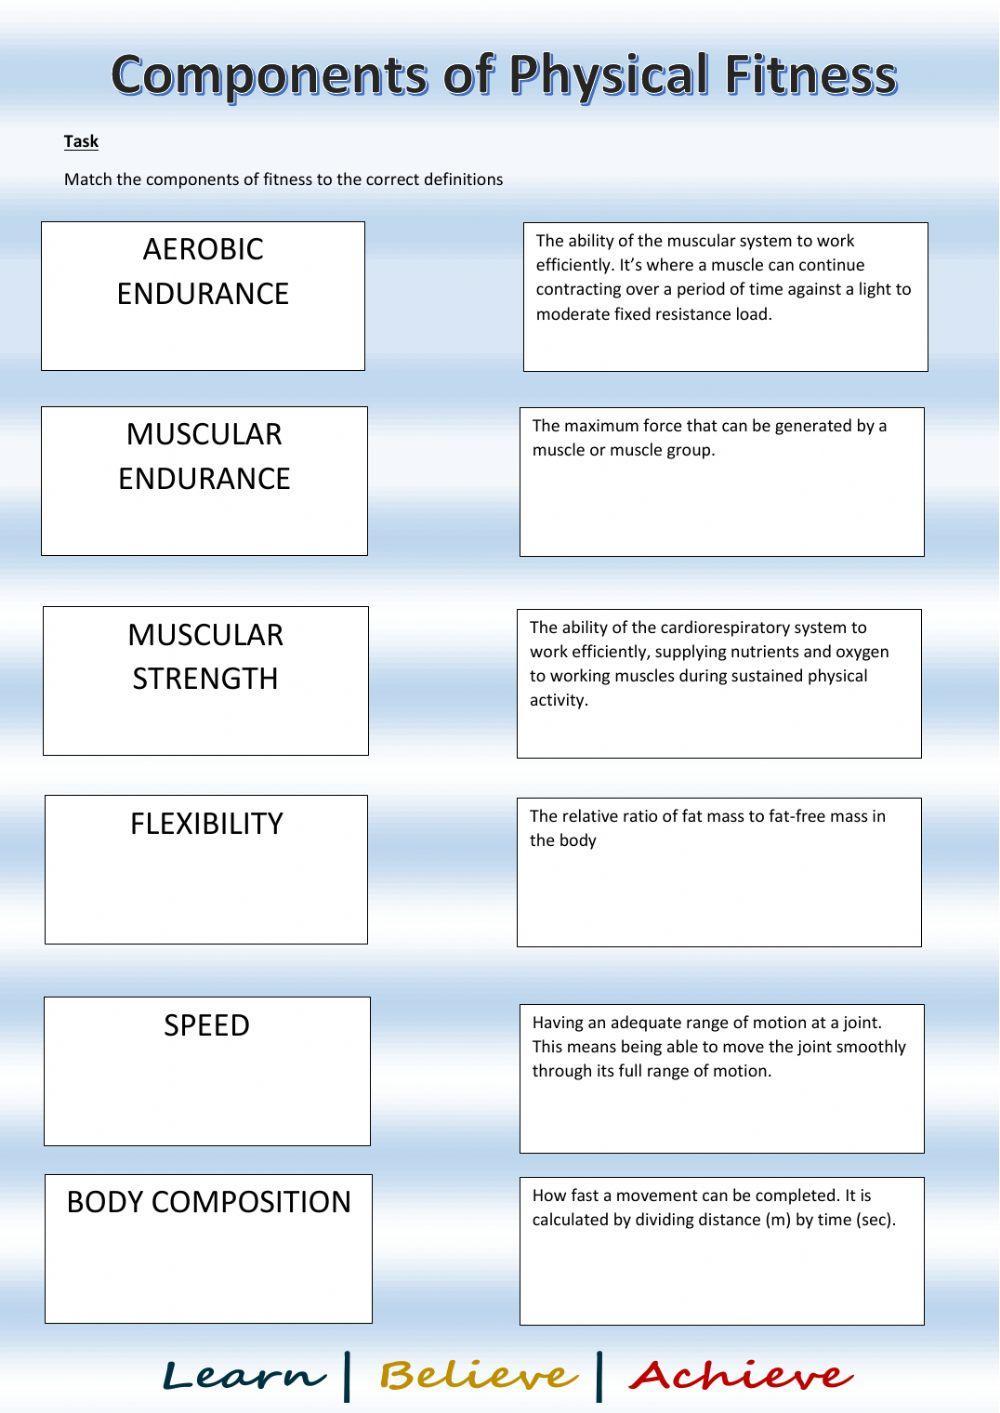 Components of physical fitness